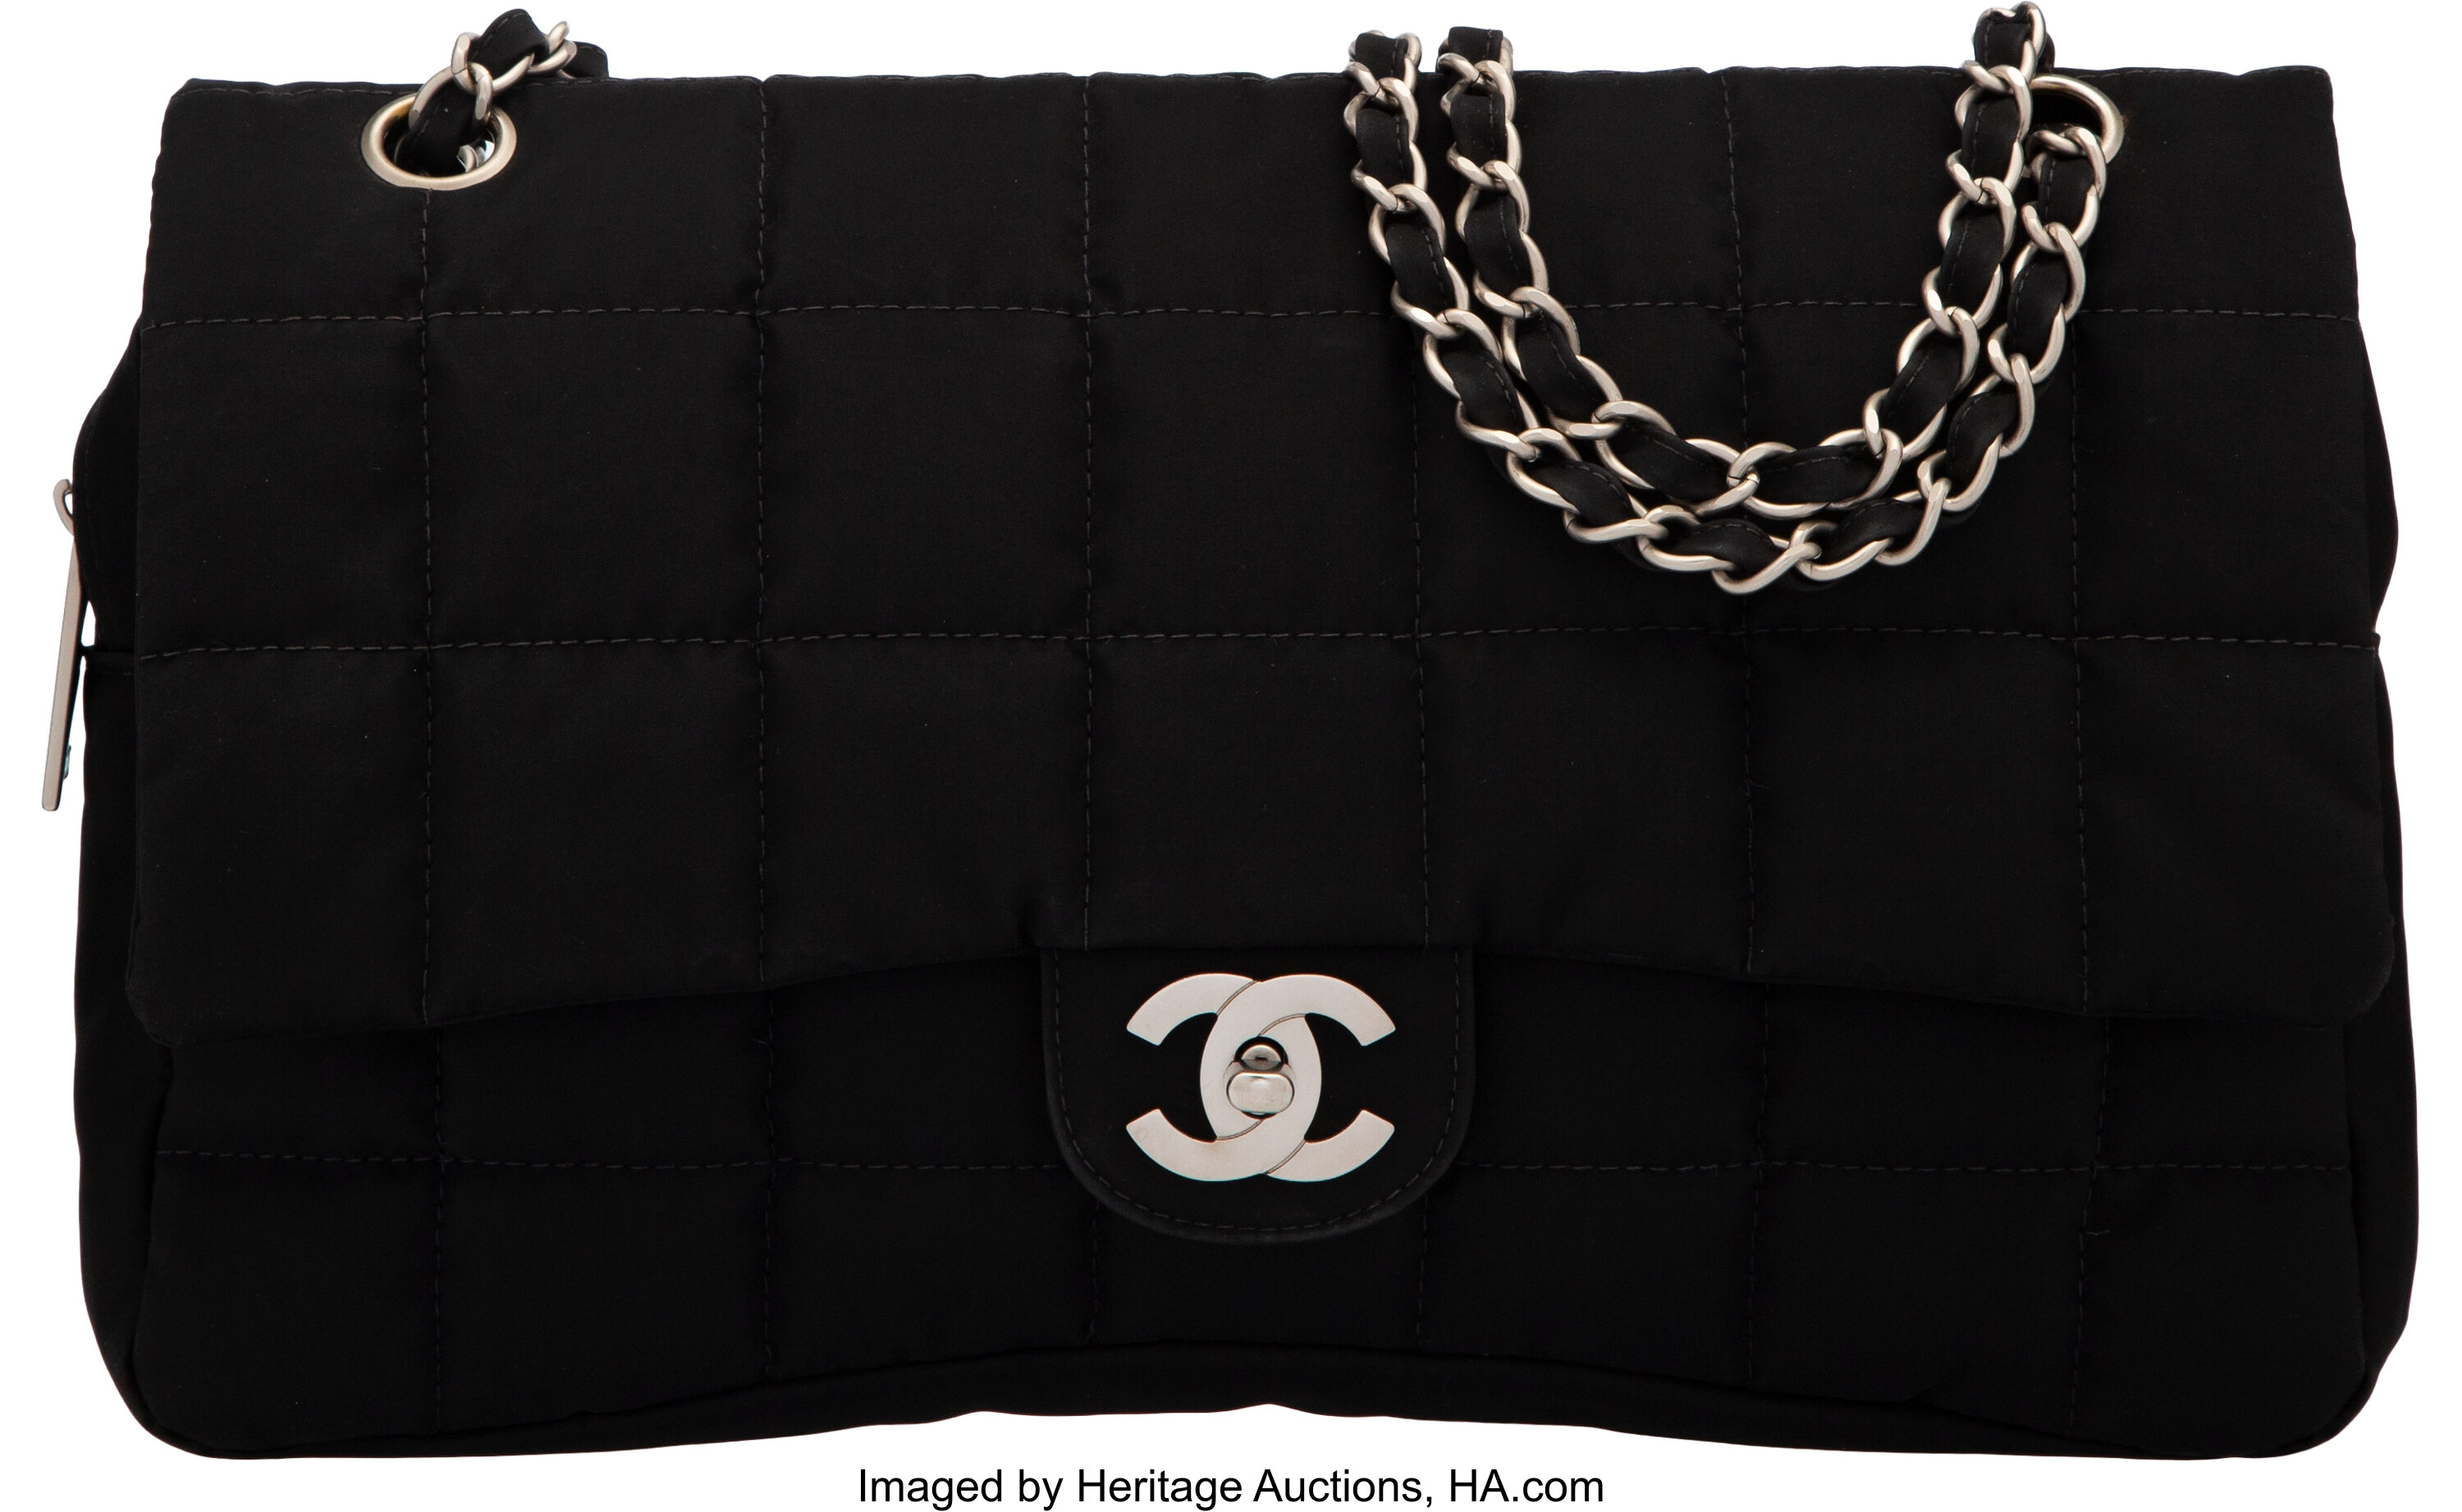 Chanel Black Quilted Nylon Flap Bag with Brushed Silver Hardware